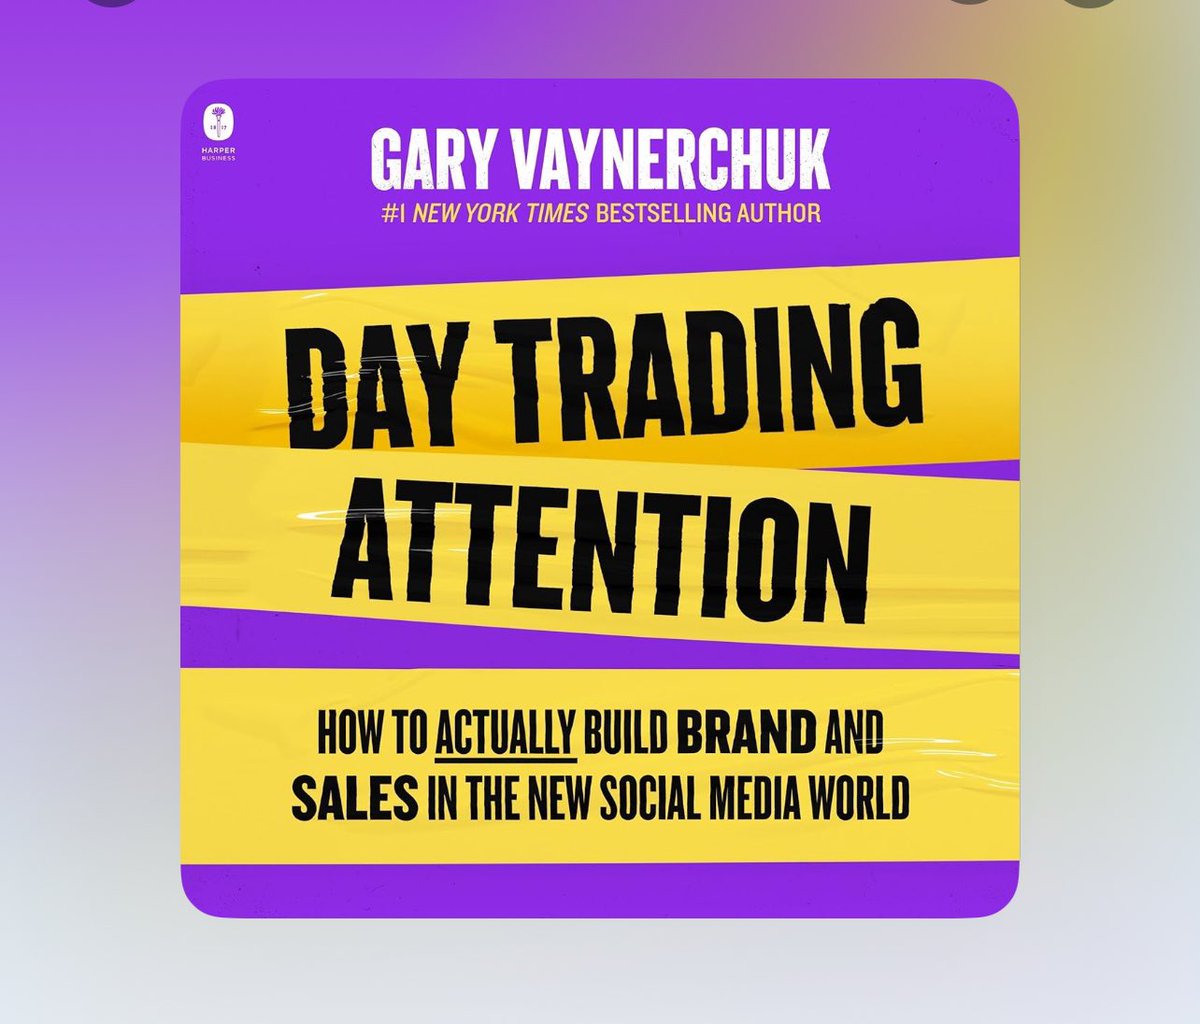 Love the new book @garyvee Listening to it is so much better for me cuz I can hear his excitement and passion - and all the off script stuff he adds as it comes to him! #daytradingattention